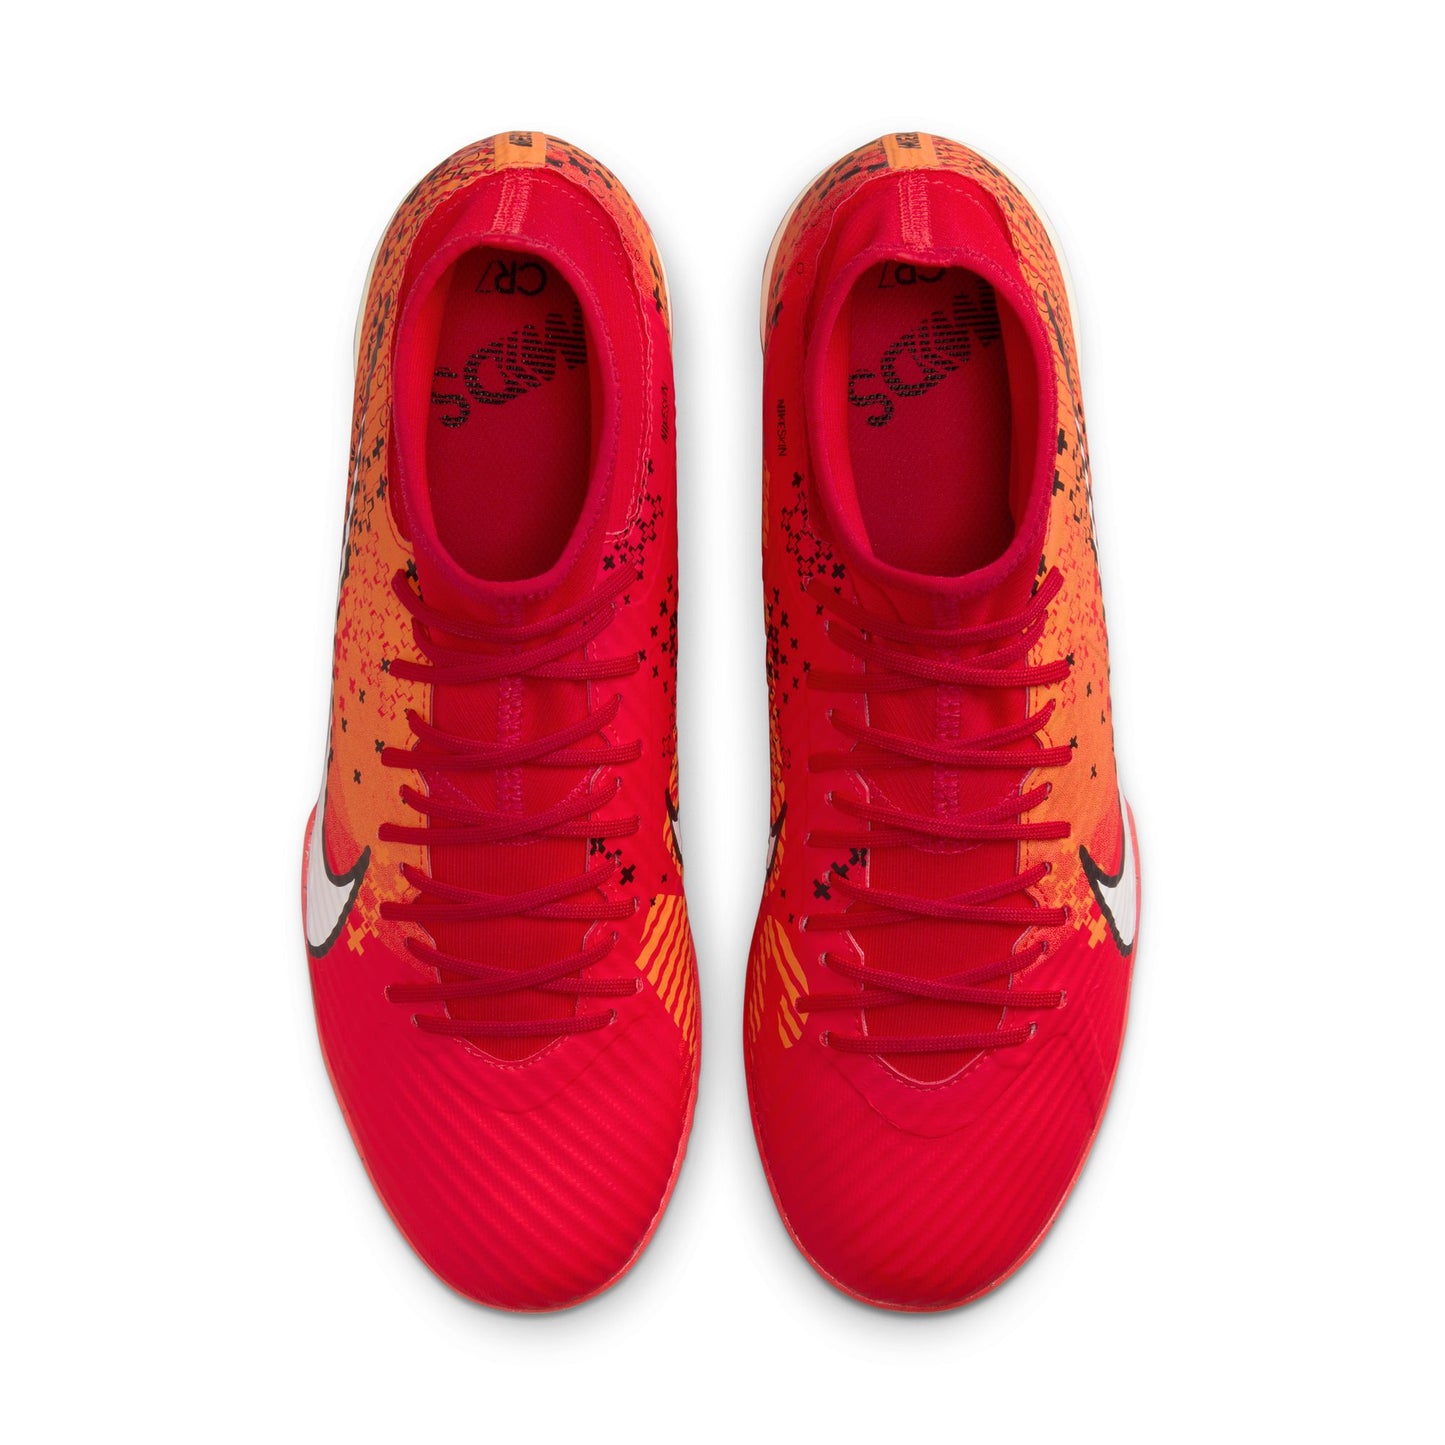 Zoom Superfly 9 MDS Academy IC [LT Crimson/Pale Ivory]